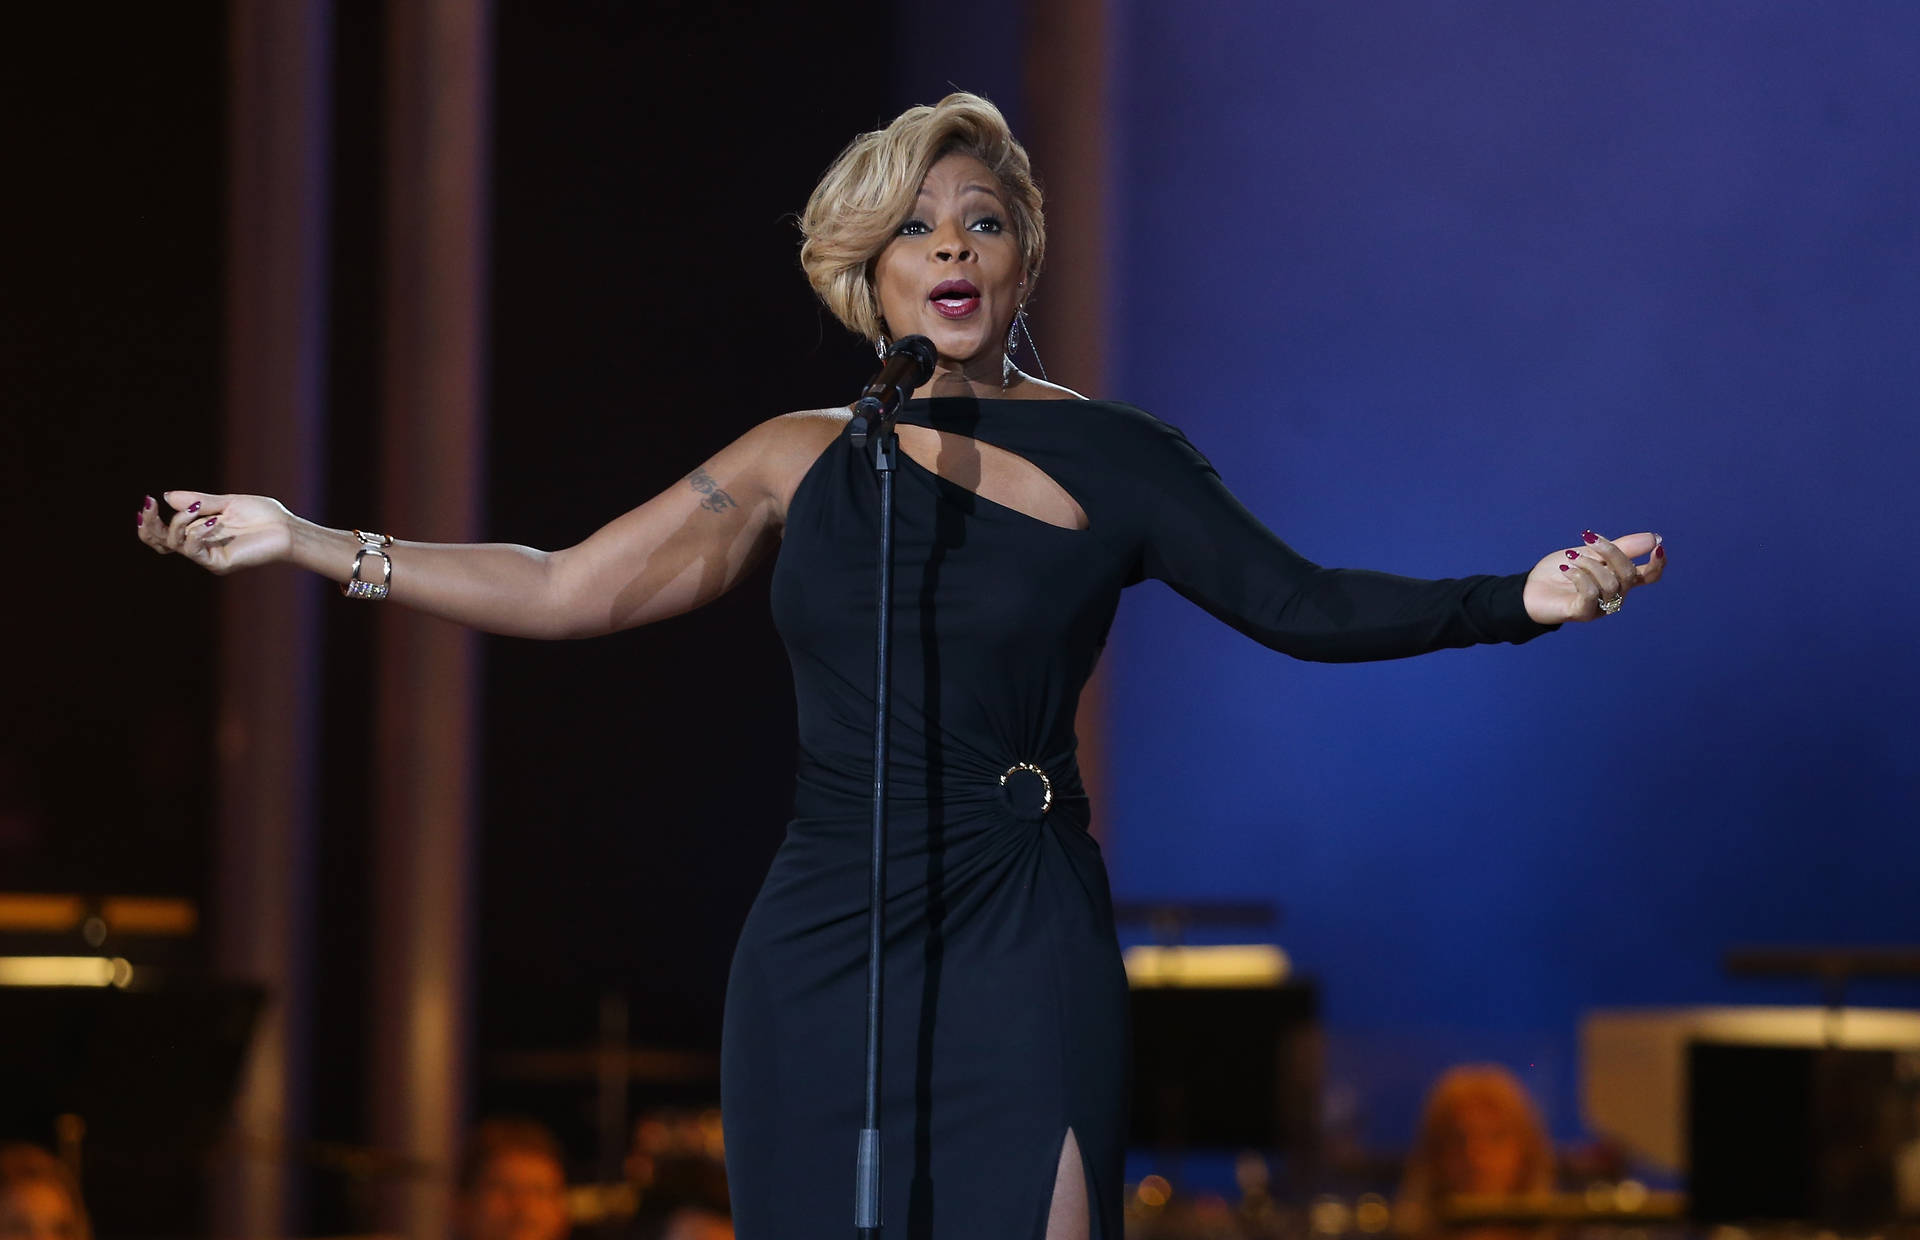 Hollywood Singer And Actress Mary J. Blige On Stage Wallpaper